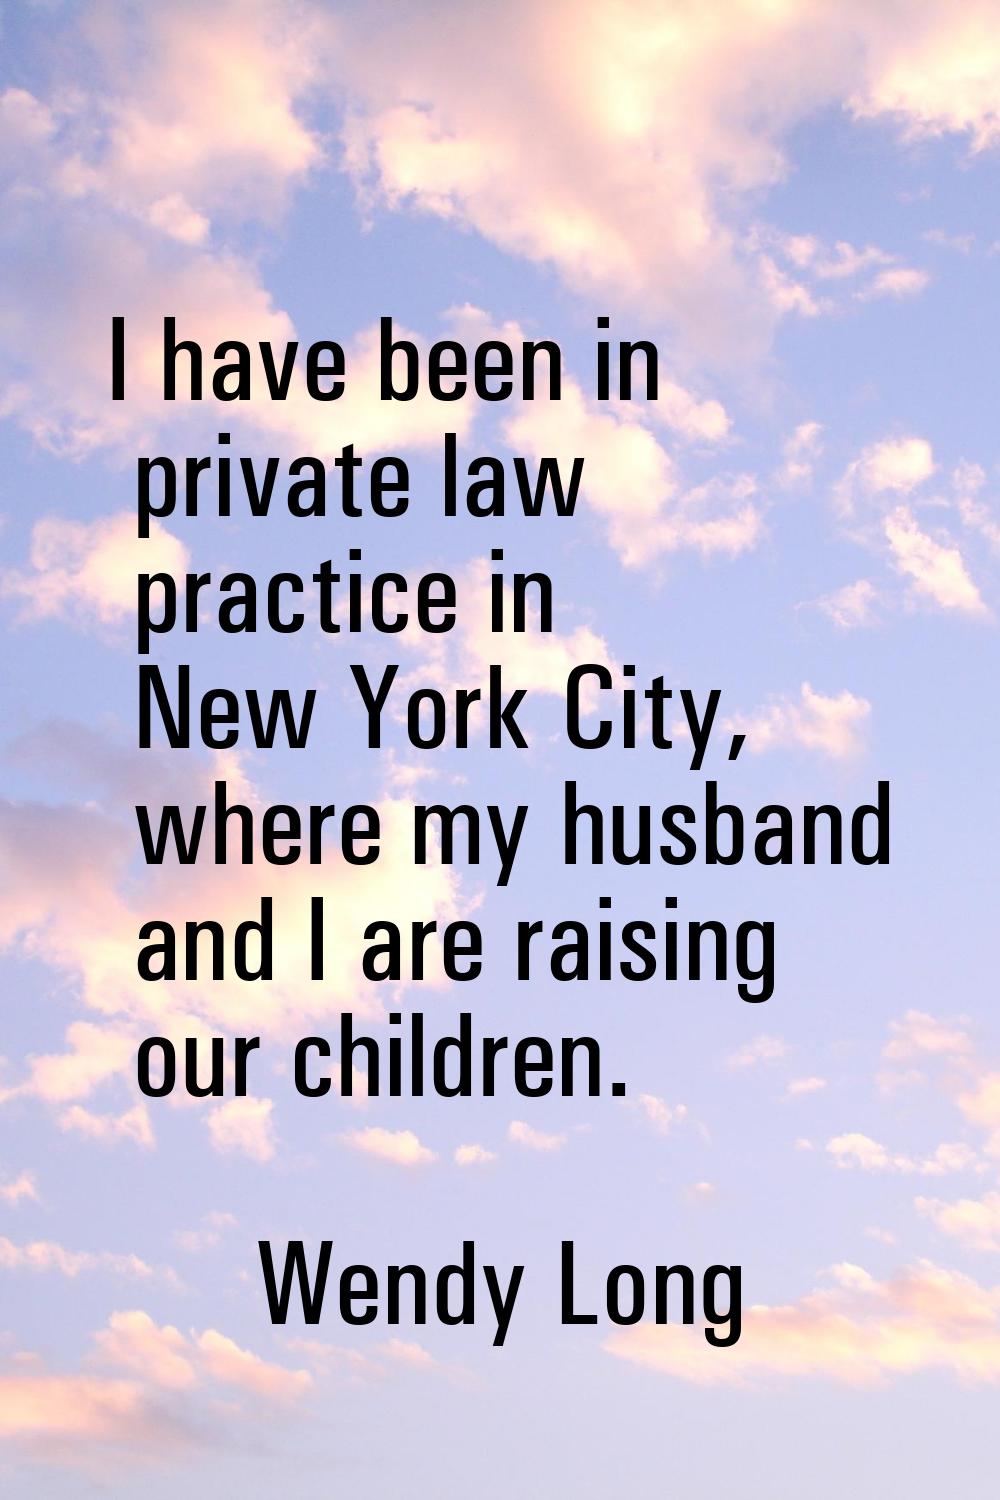 I have been in private law practice in New York City, where my husband and I are raising our childr